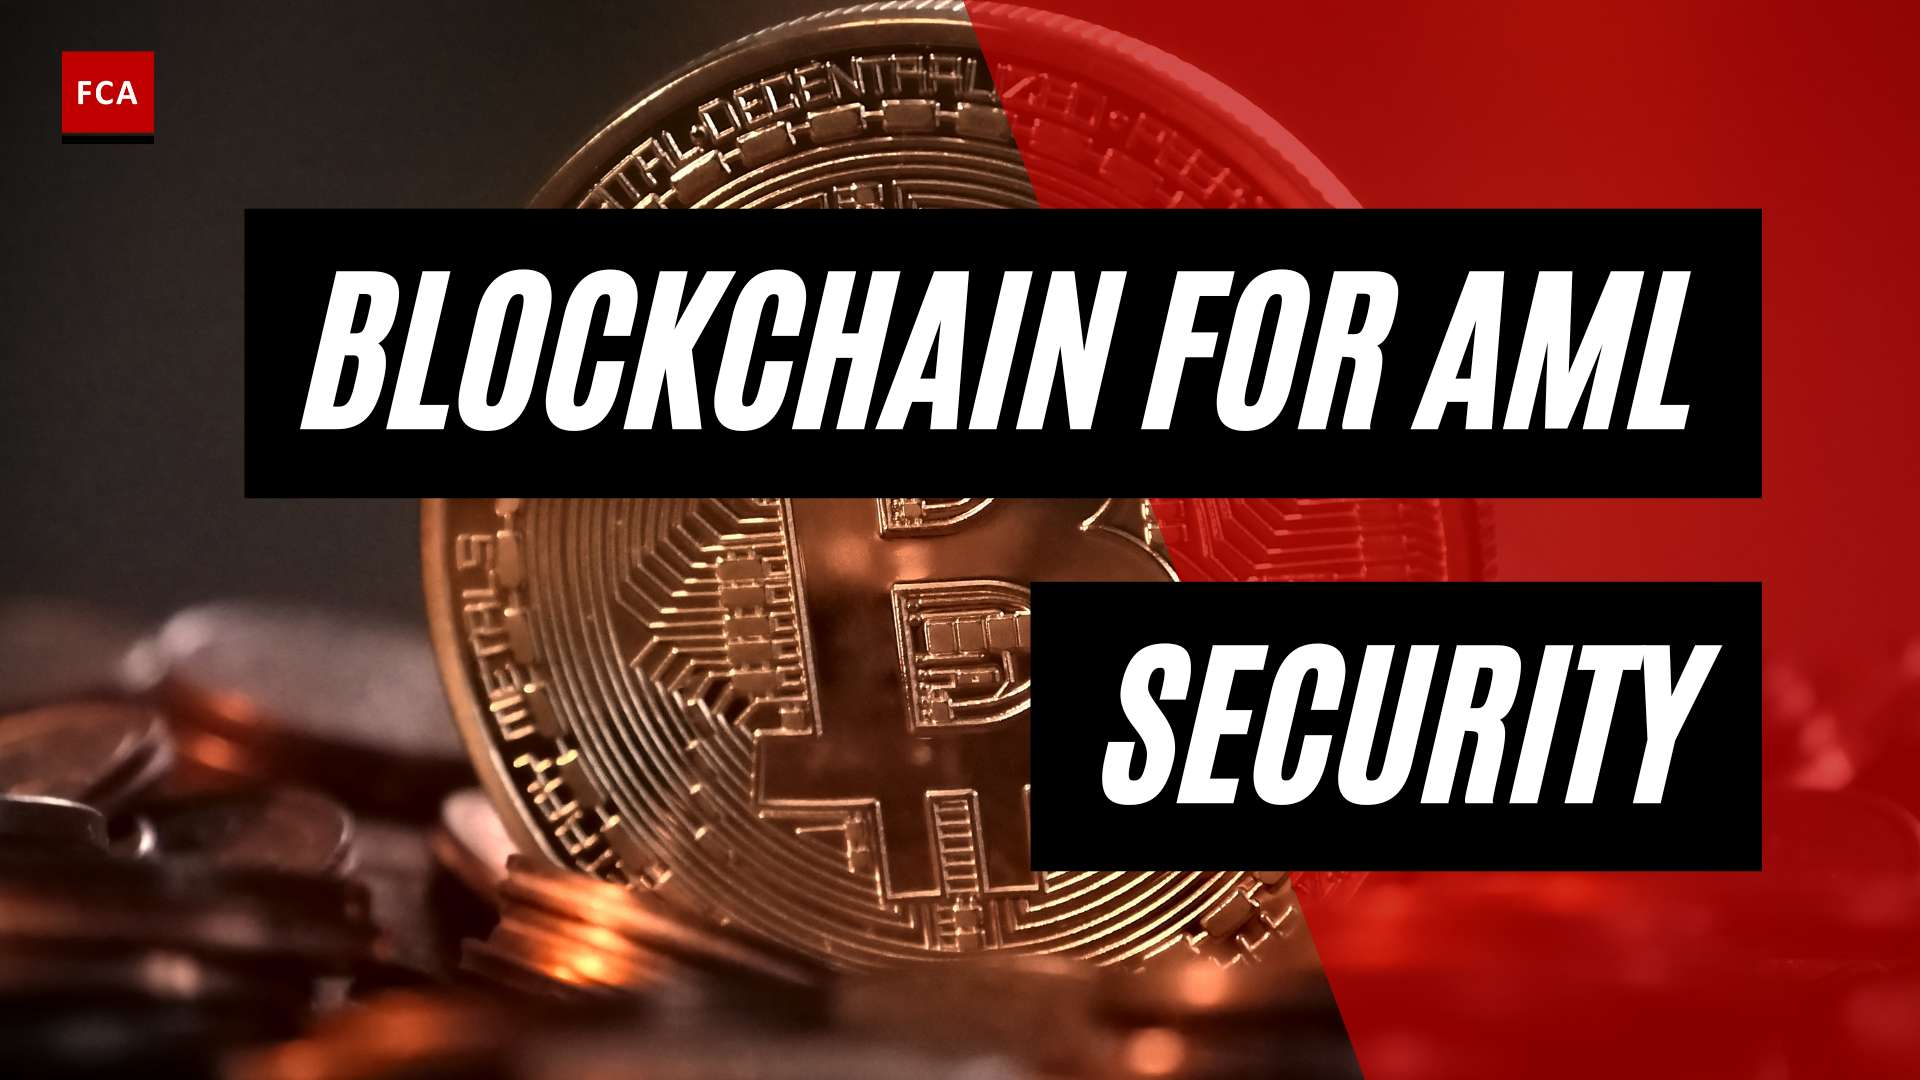 Enhancing Security: Blockchain Applications For Aml Risk Management